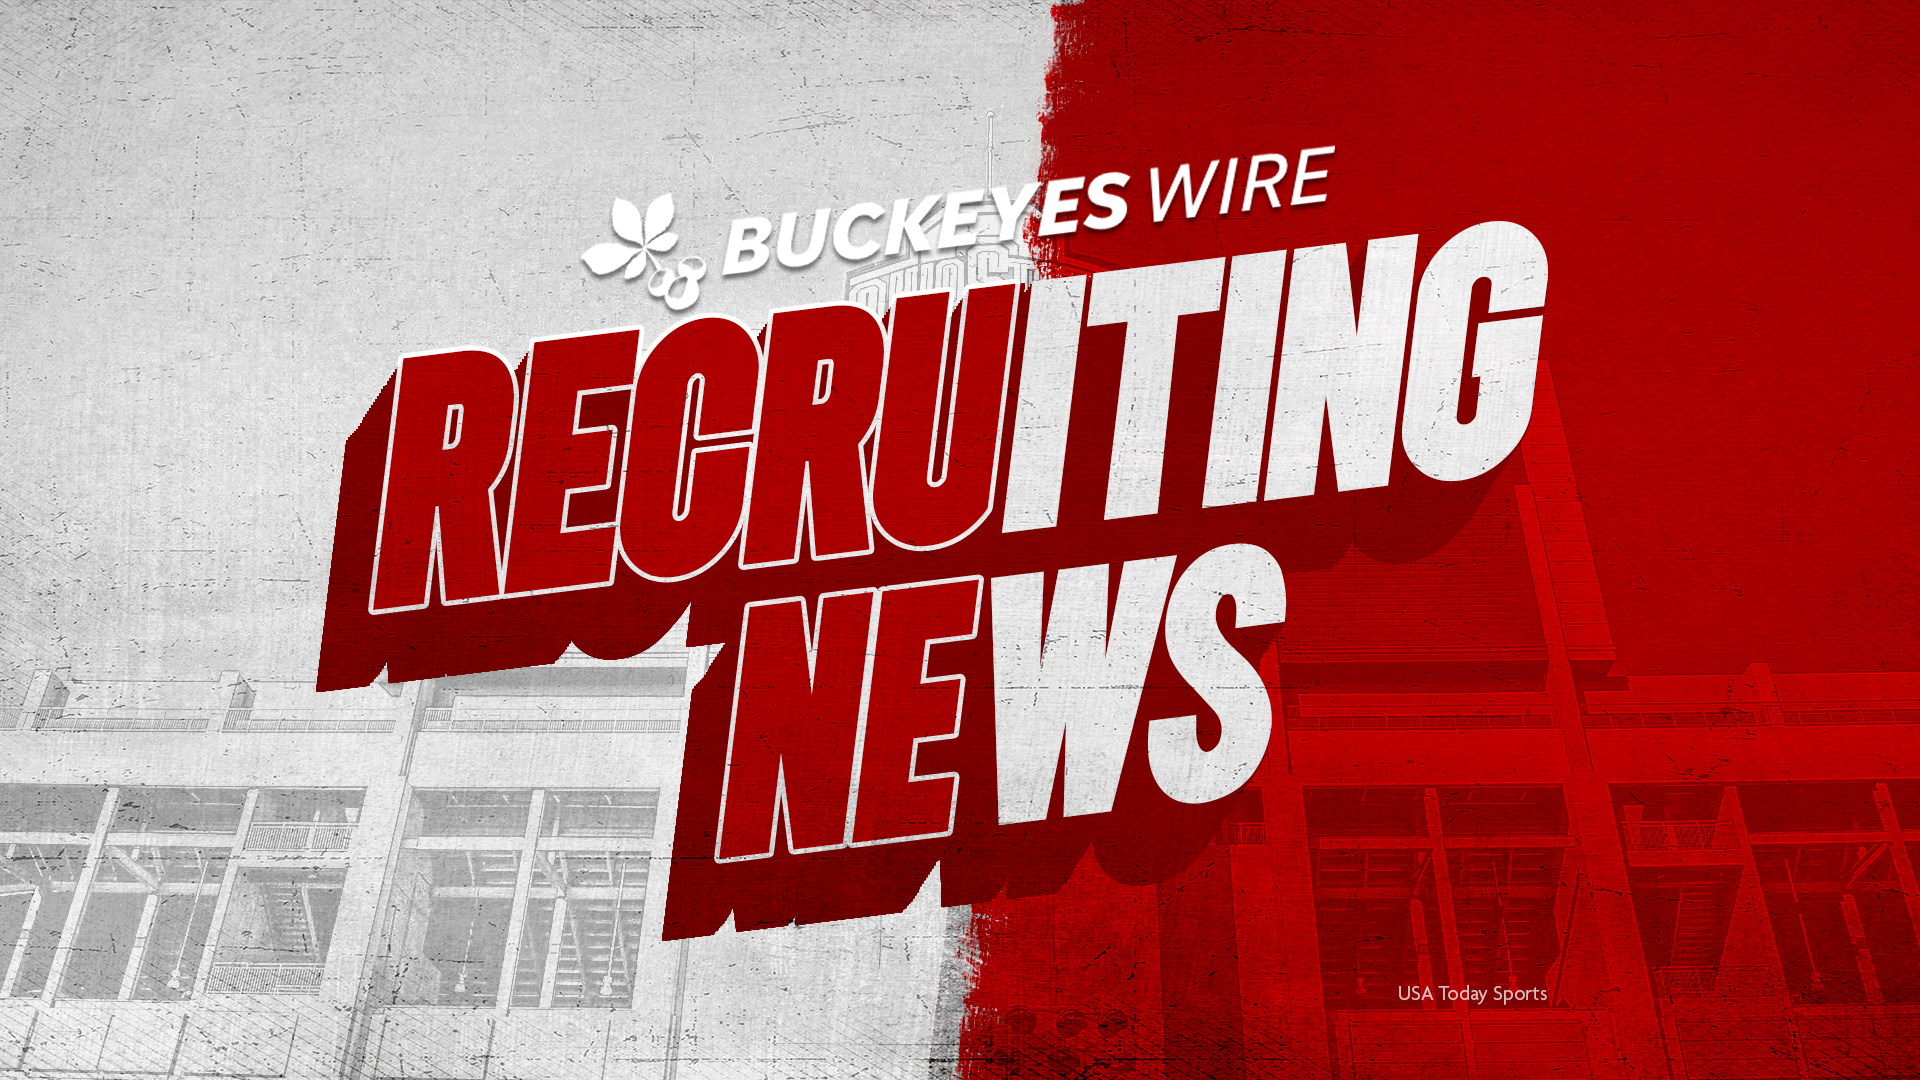 Ohio State wide receiver recruit sets date to announce decision